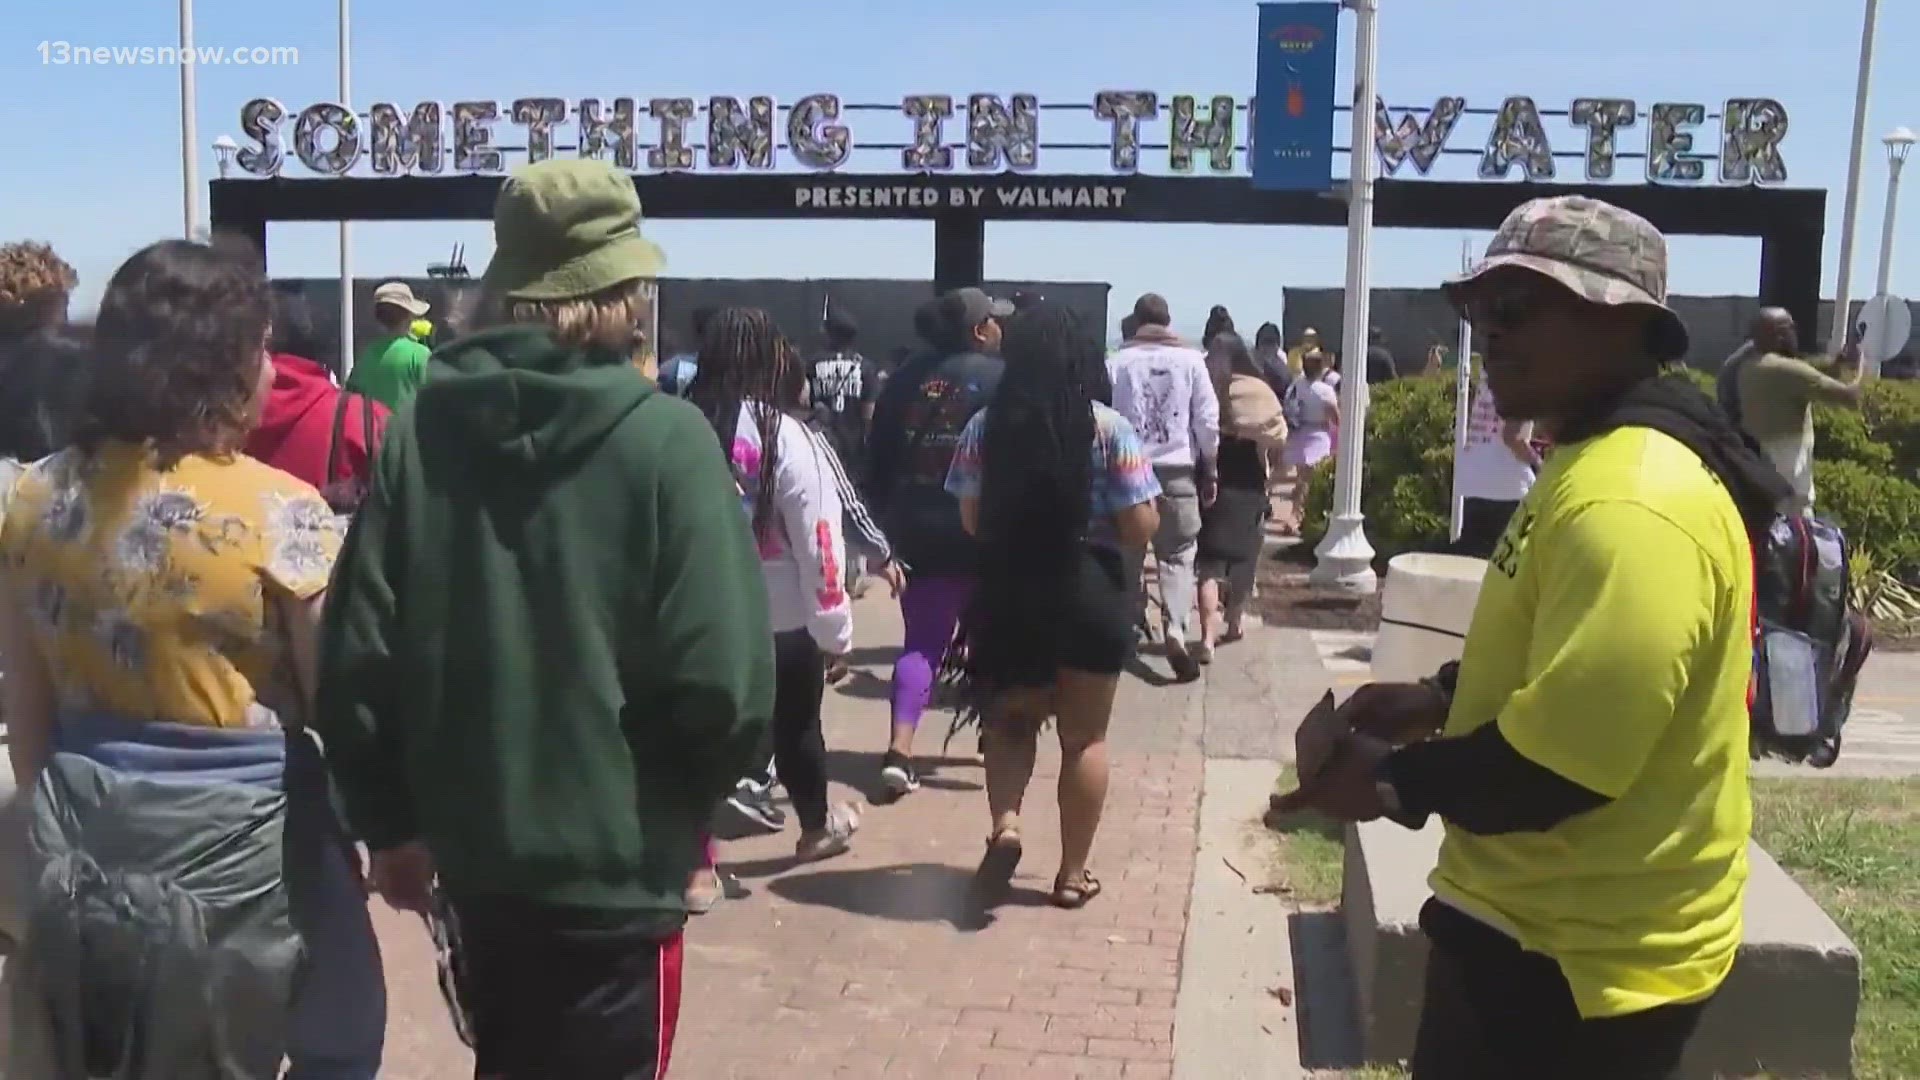 The festival's return date is still up in the air, but committee members are discussing ways to improve the experience for festivalgoers and businesses.